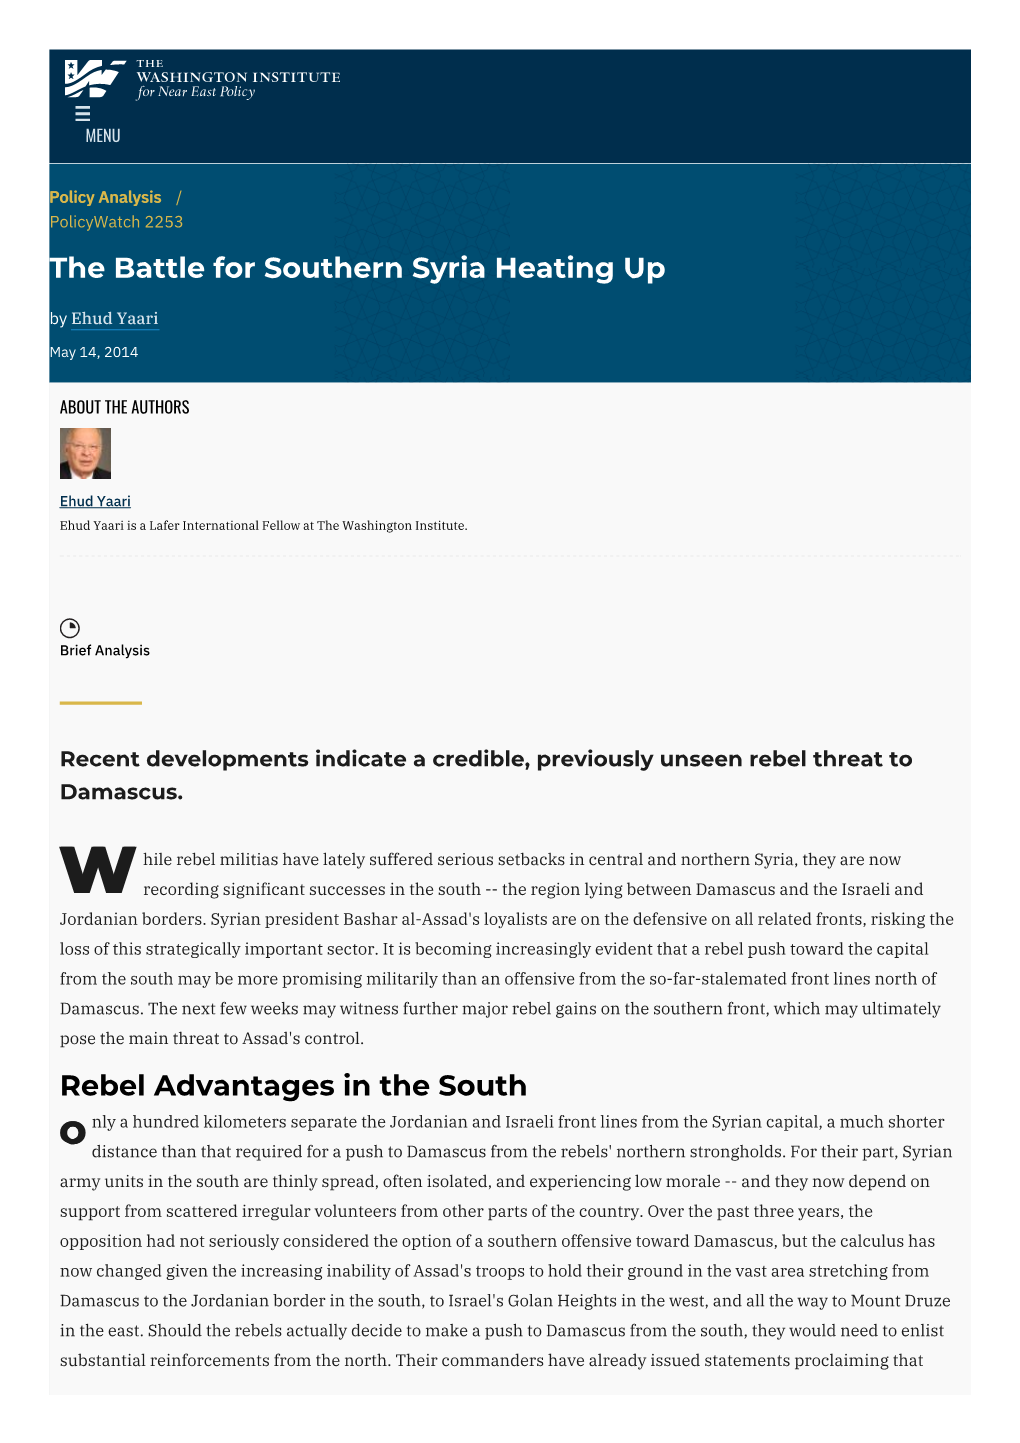 The Battle for Southern Syria Heating up | the Washington Institute